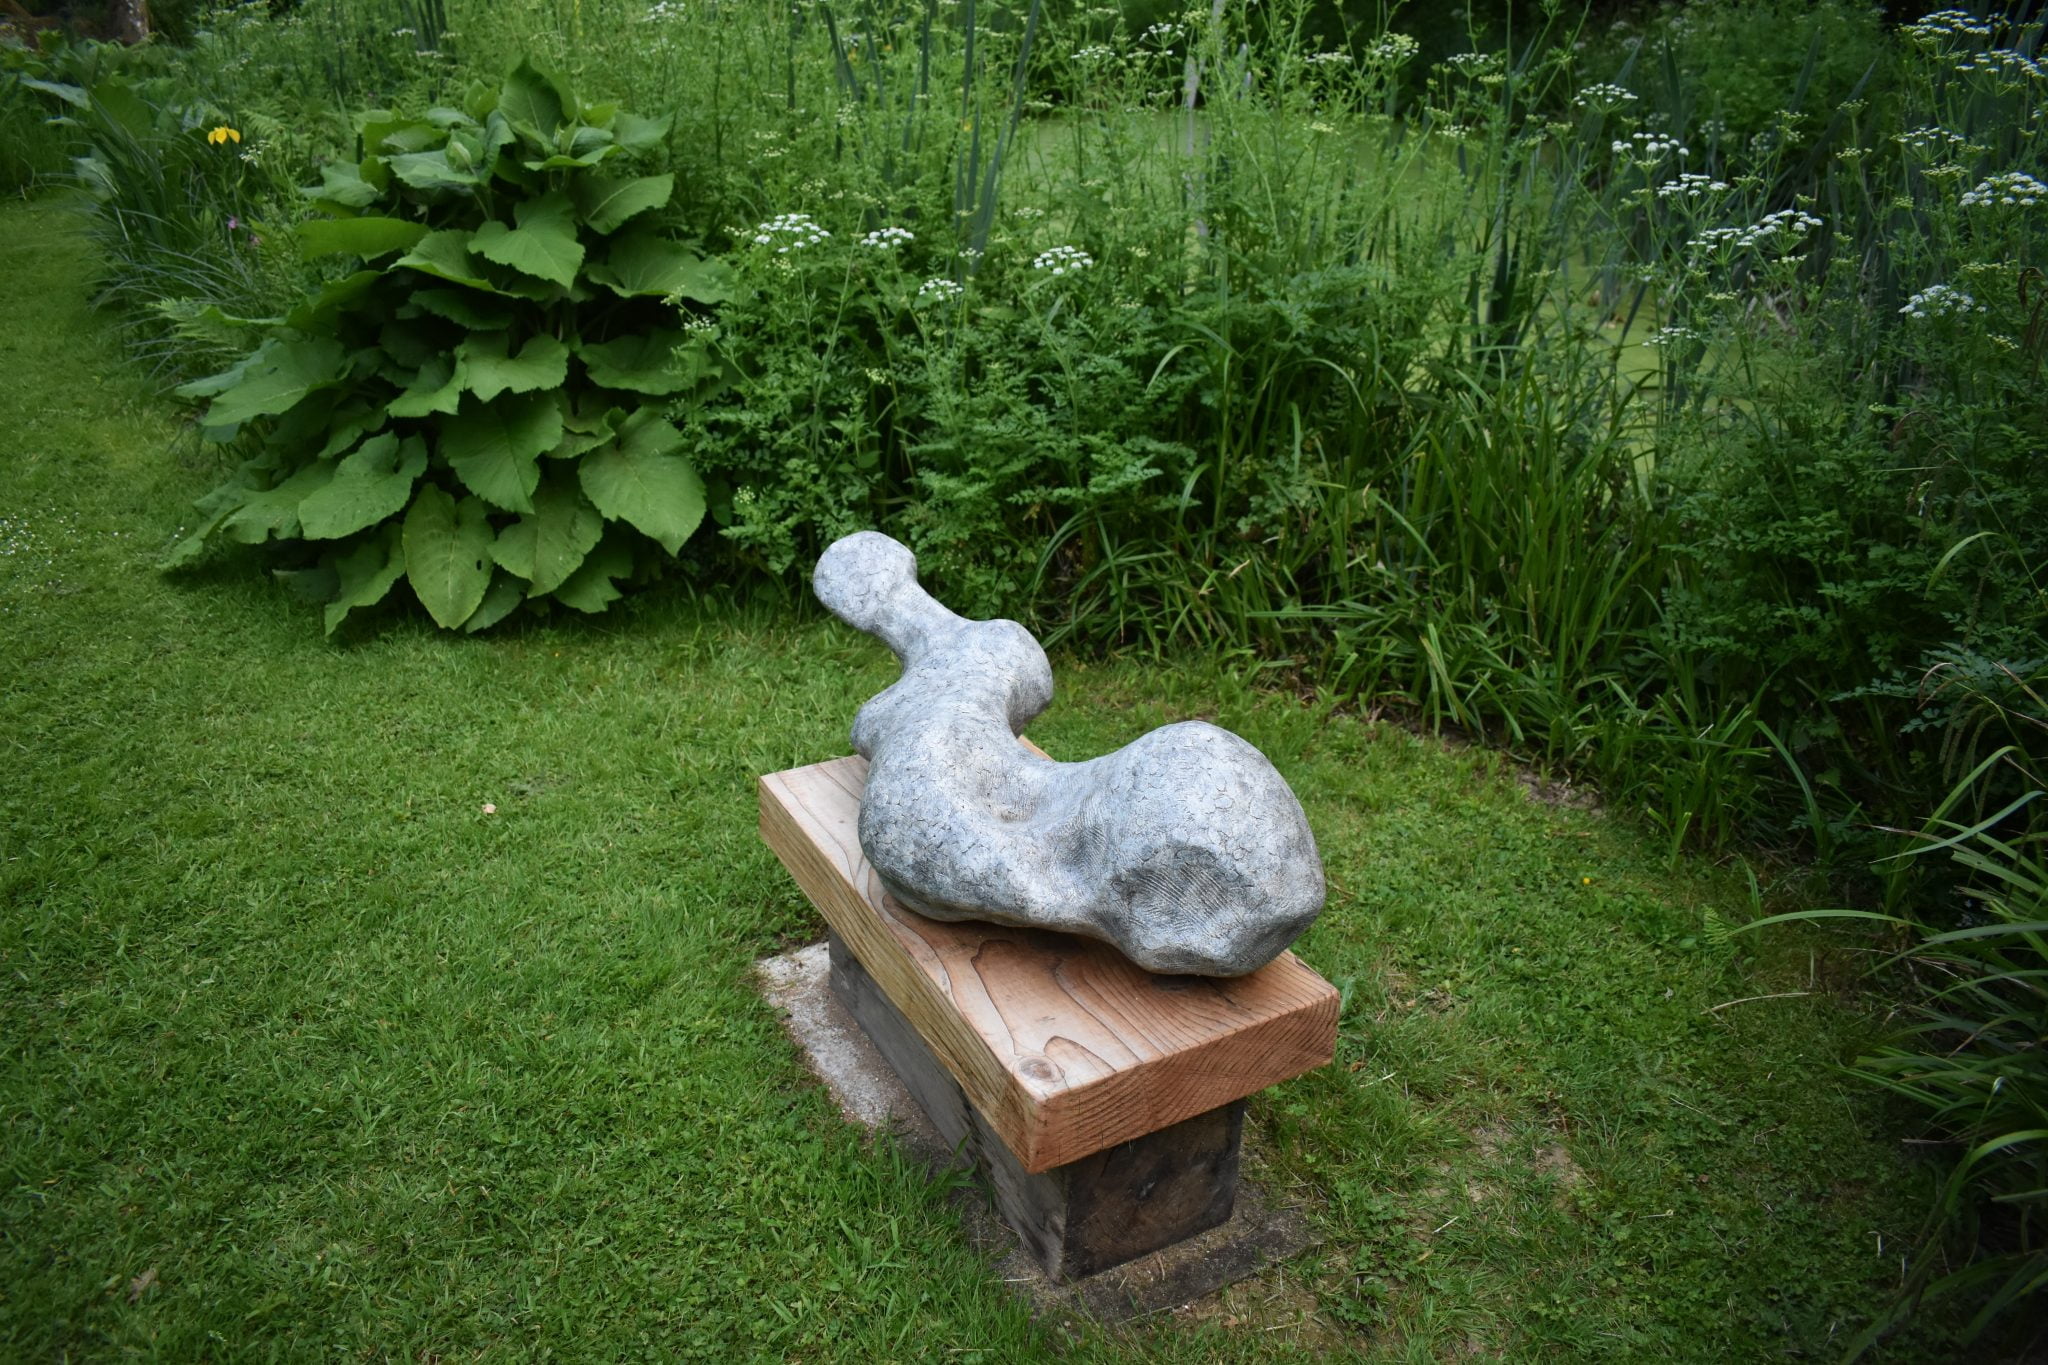 An abstract sculpture of a female figure placed in a garden setting